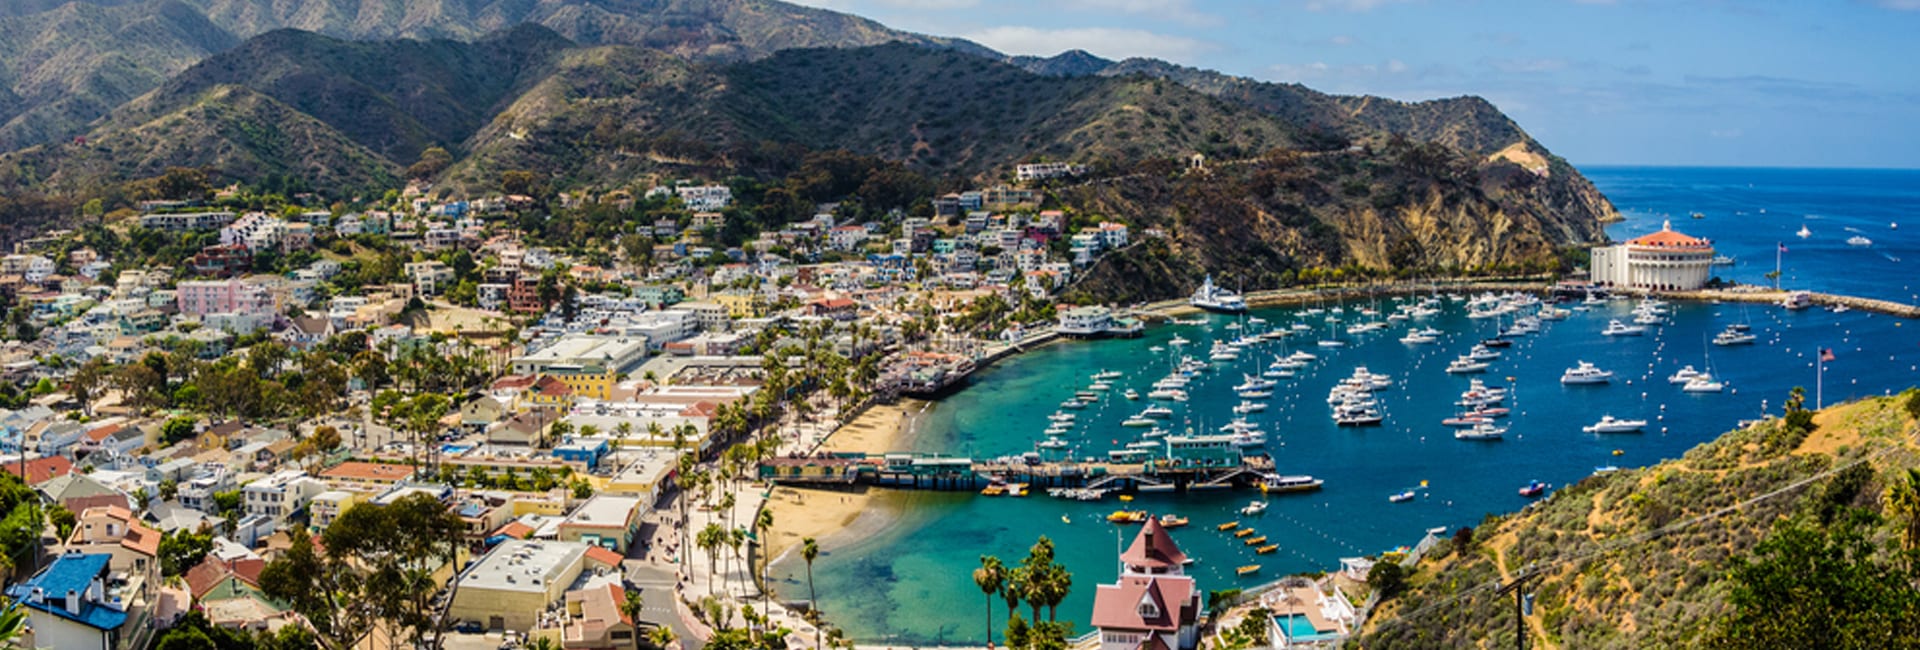 Catalina aerial view